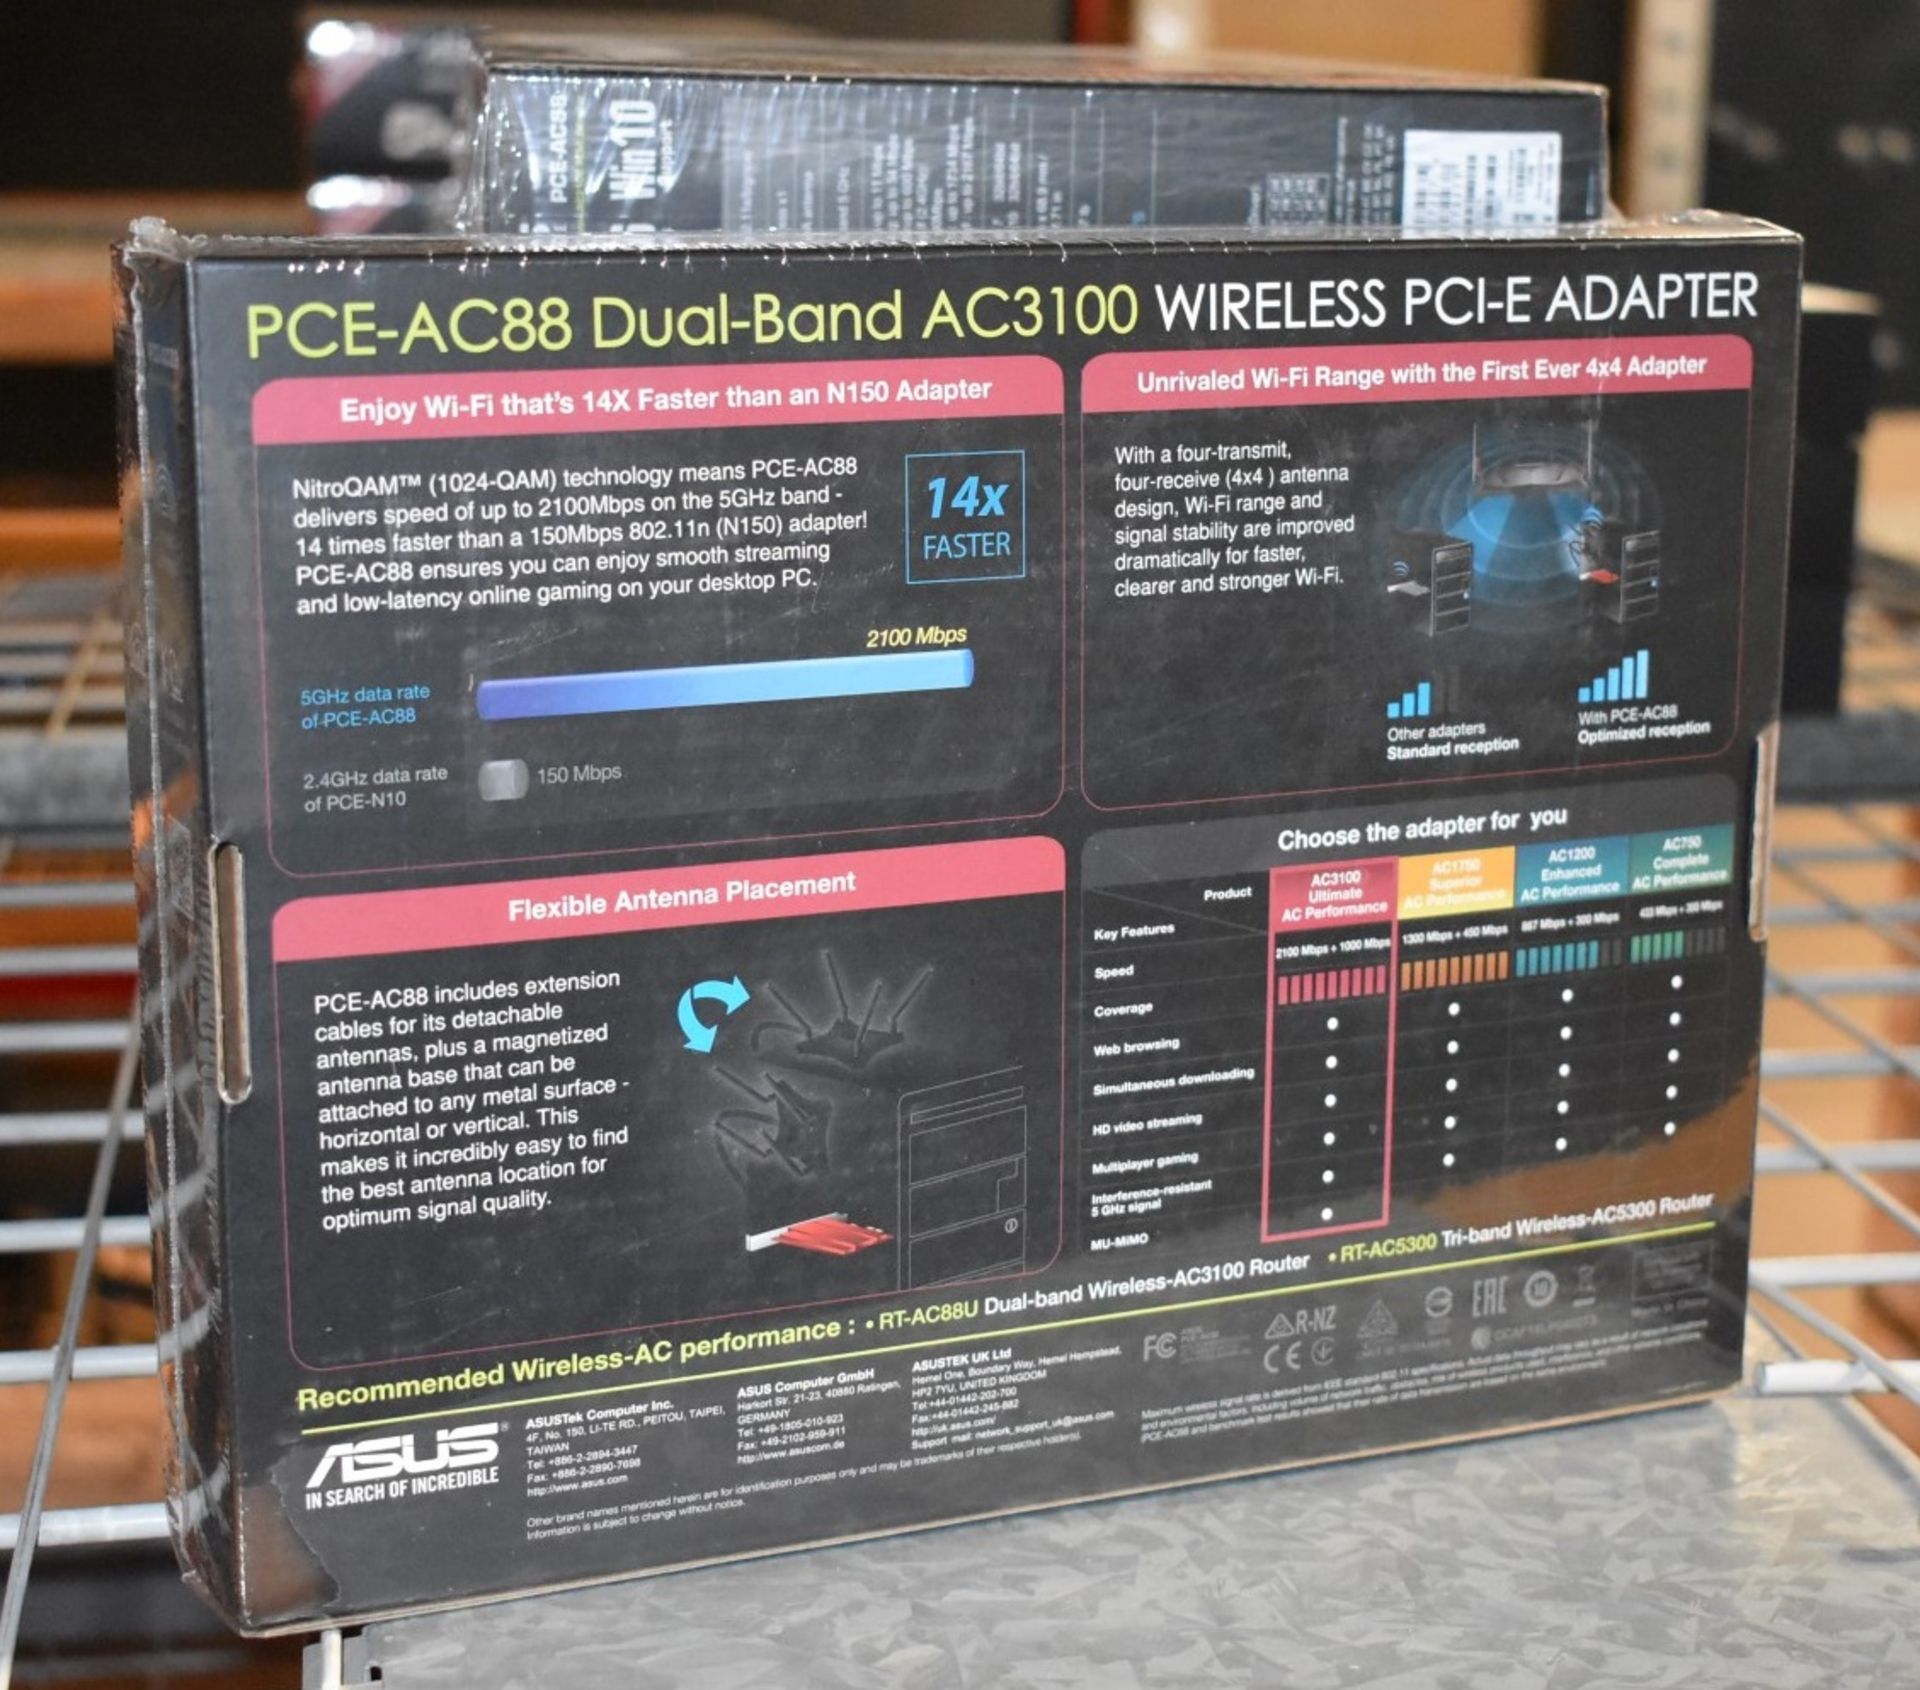 1 x Asus PCE-AC88 Dual Band Wireless PCI Express Network Interface Card With Antenna Base - New - Image 3 of 3